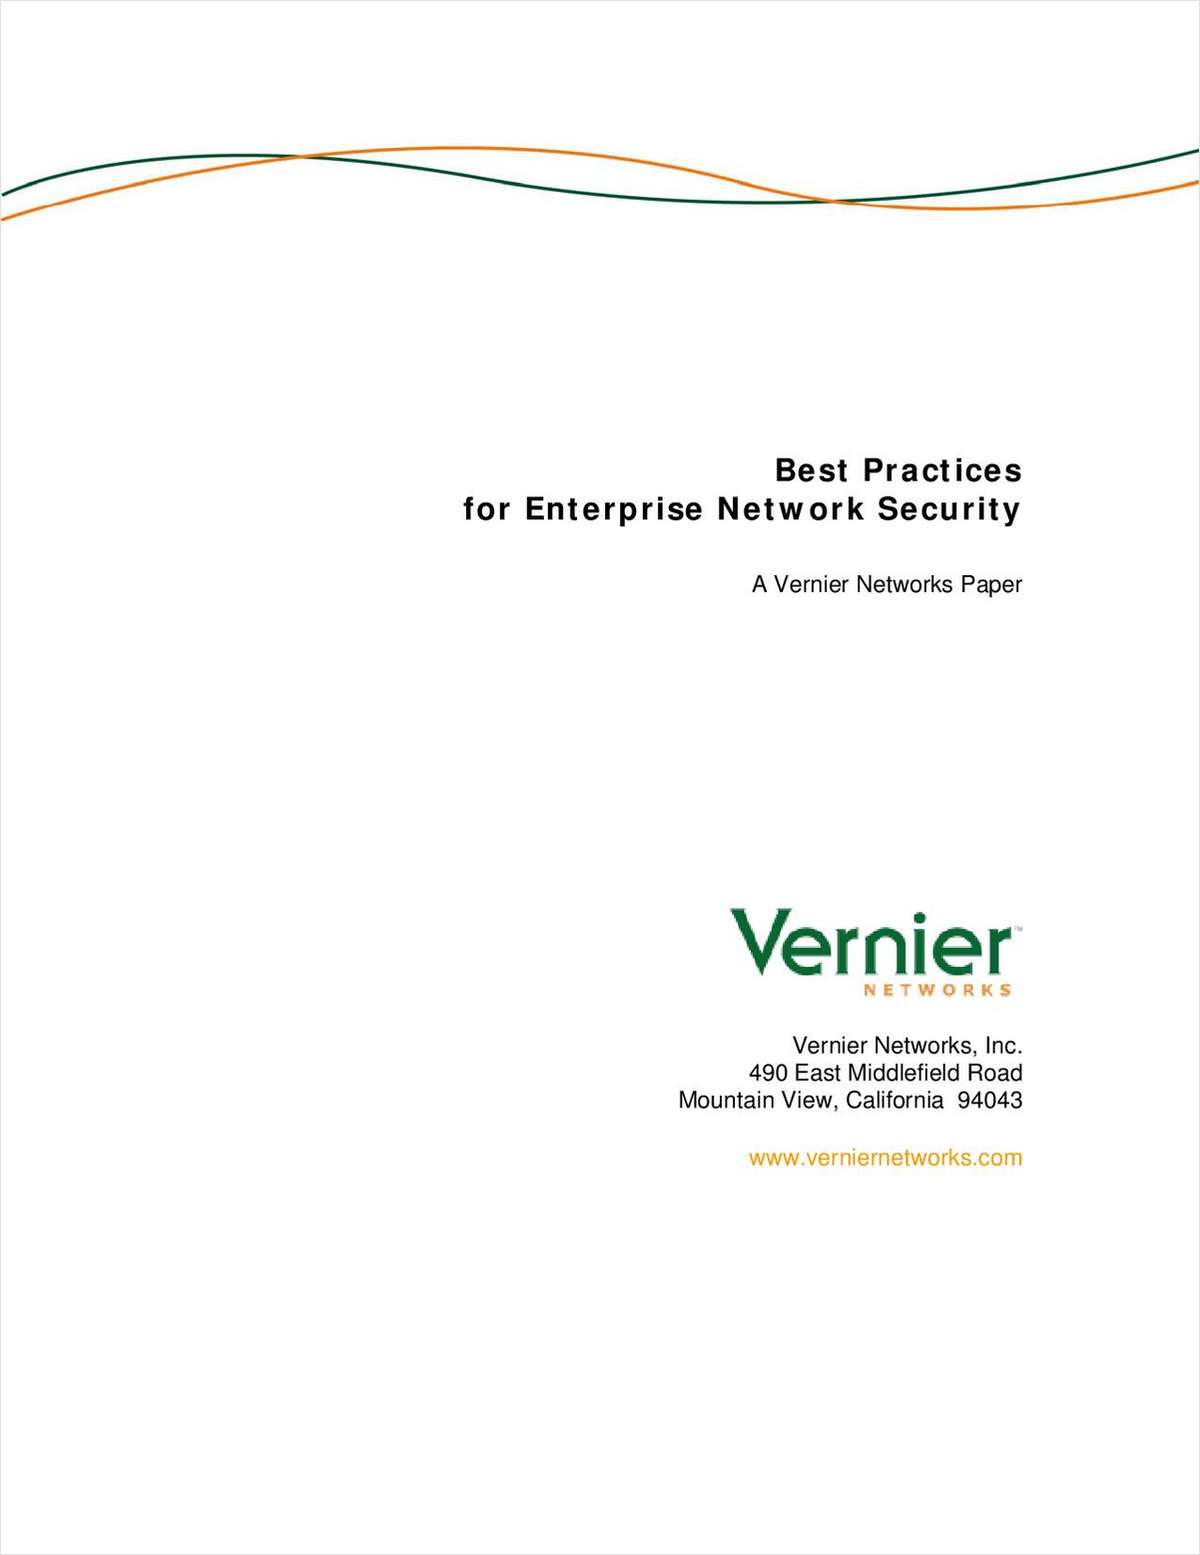 BEST PRACTICES for Enterprise Network Security